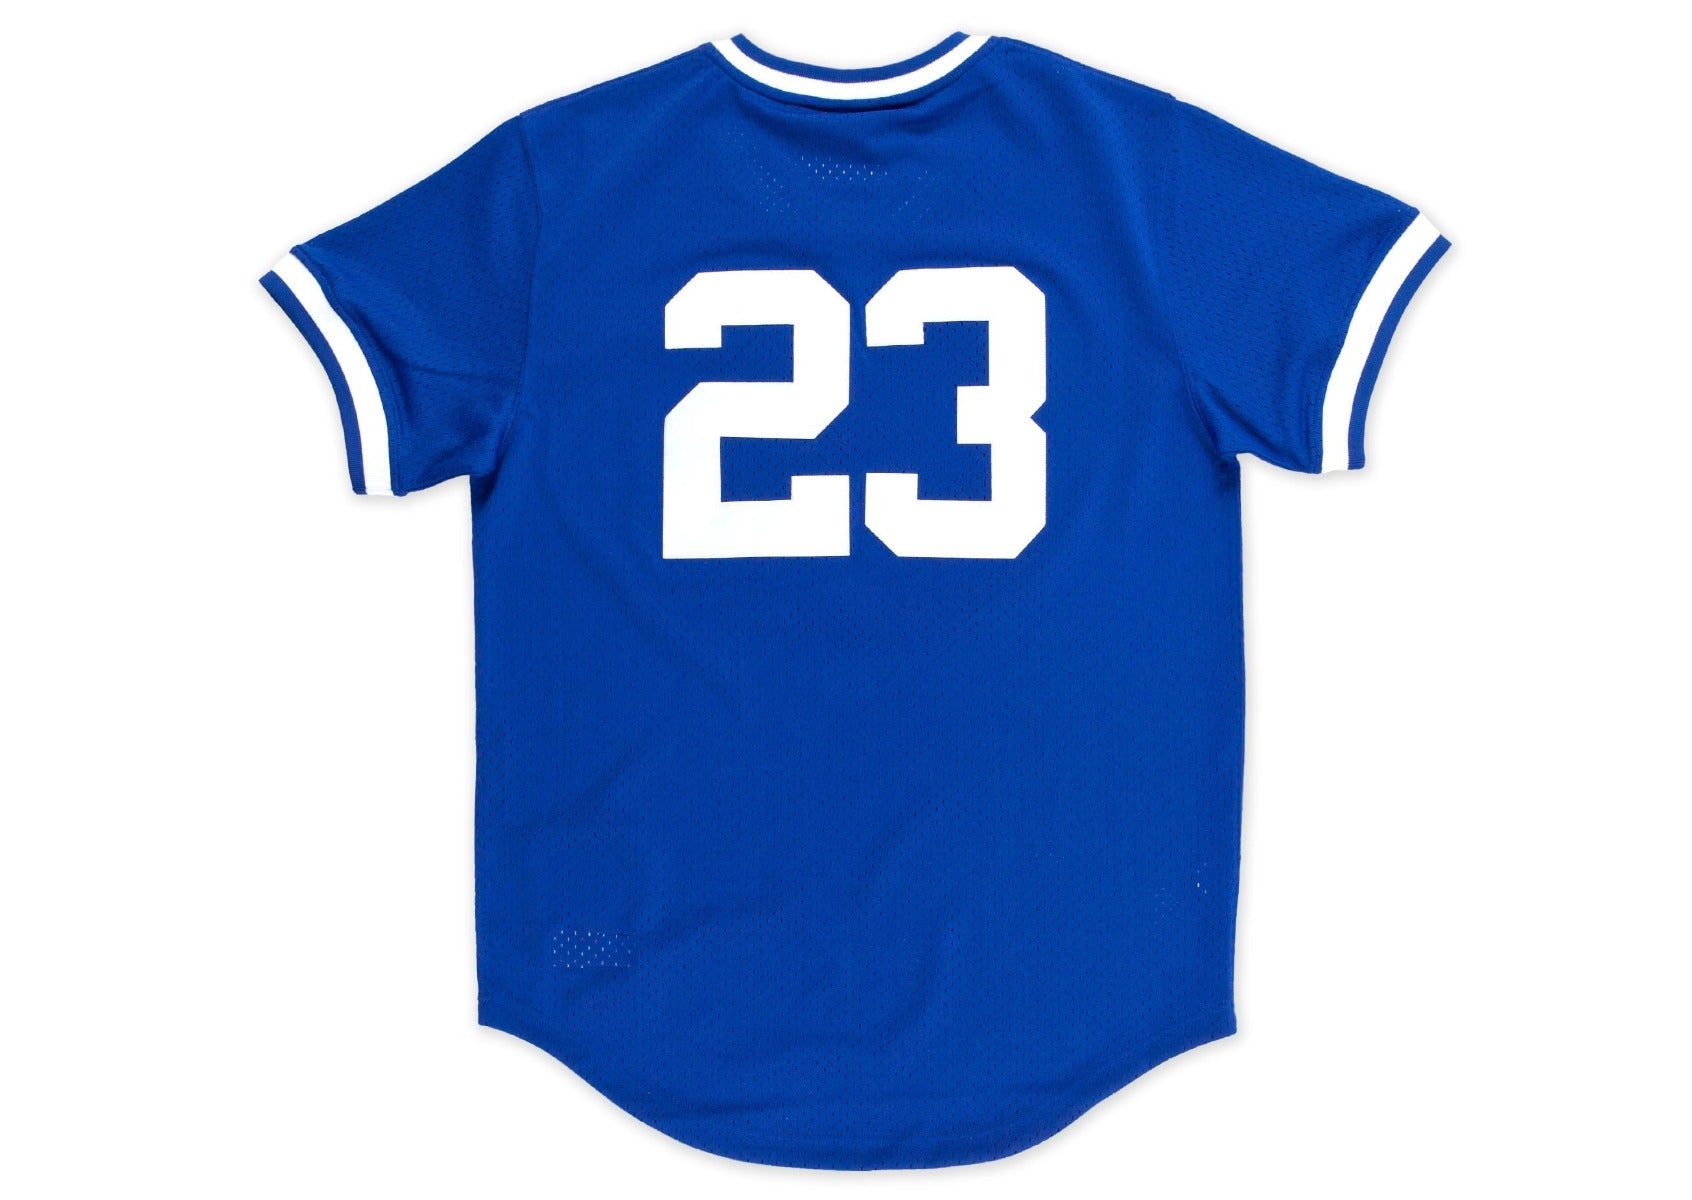 Chicago Cubs #23 Ryne Sandberg 1984 White Throwback Jersey on sale,for  Cheap,wholesale from China